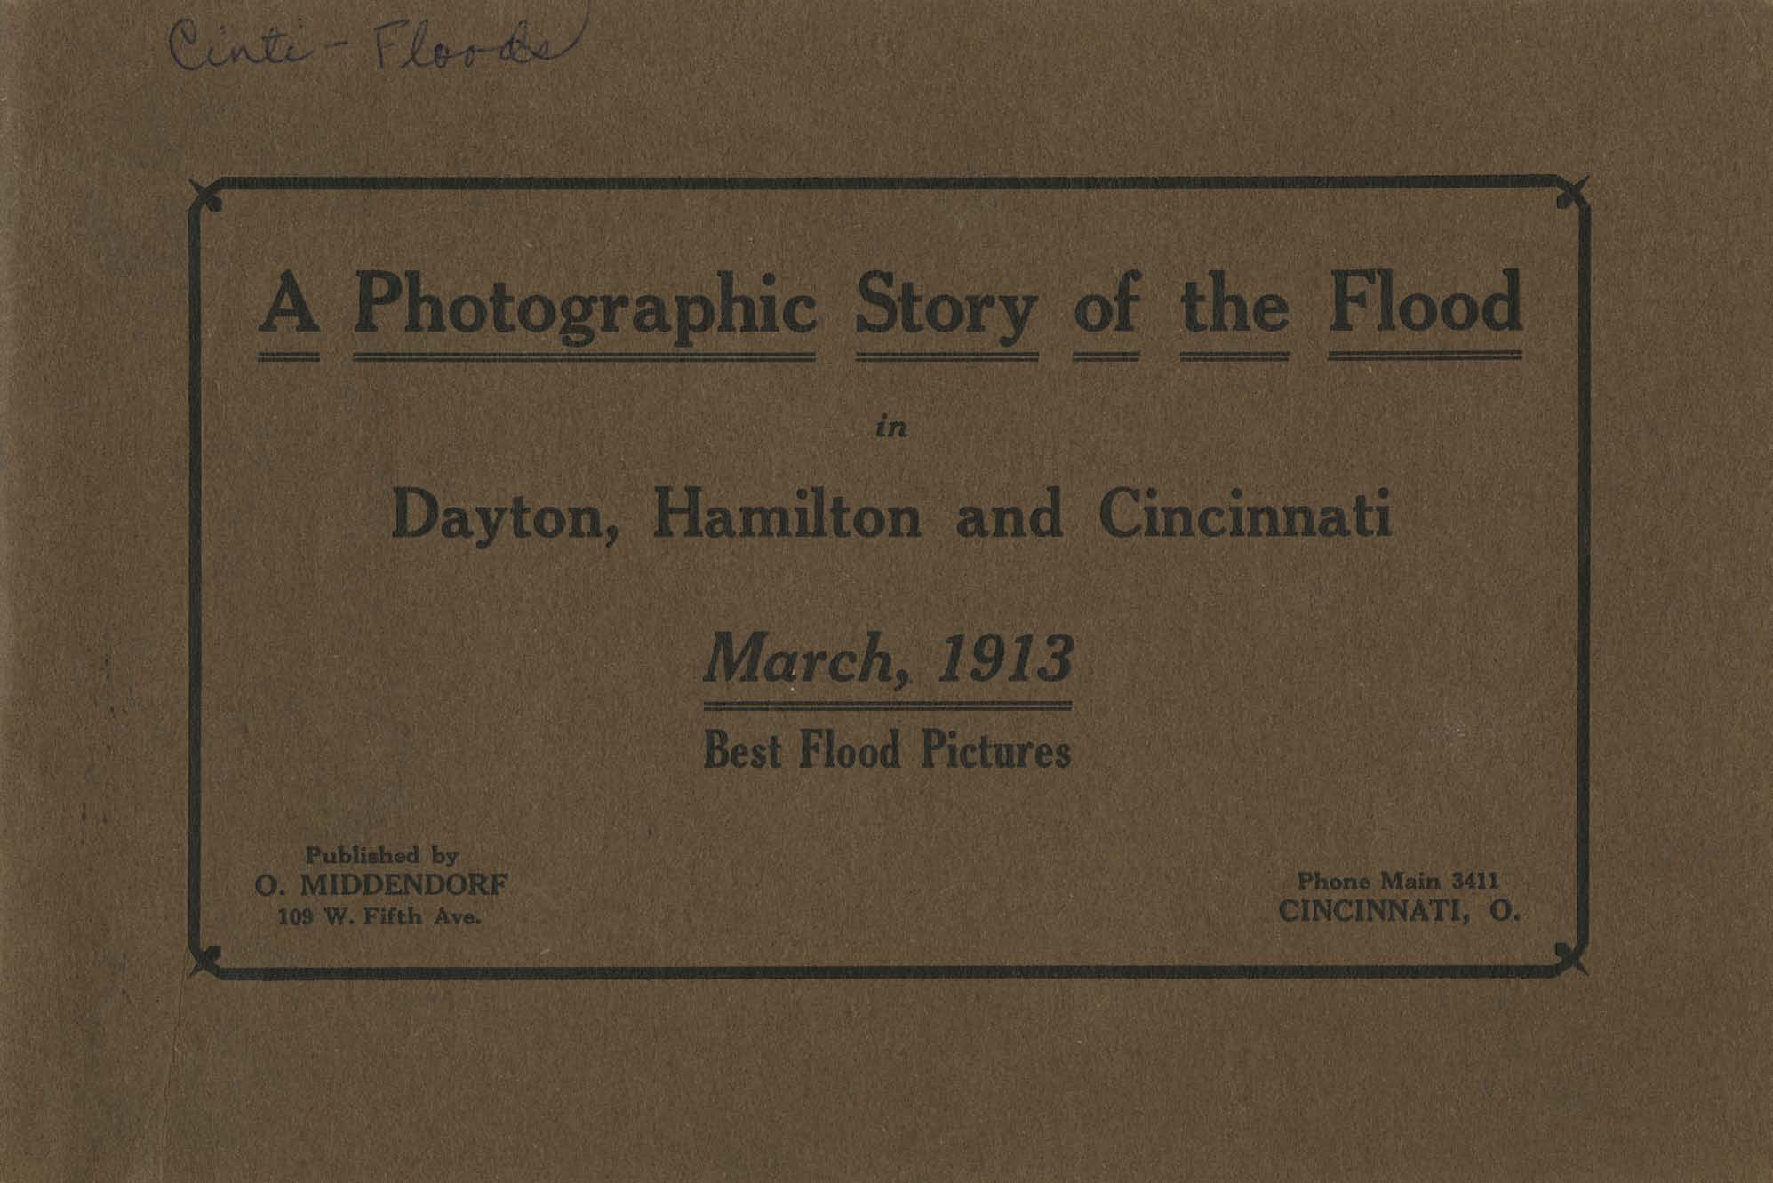 A photographic story of the flood in Dayton, Hamilton, and Cincinnati, March, 1913 : best flood pictures Preview